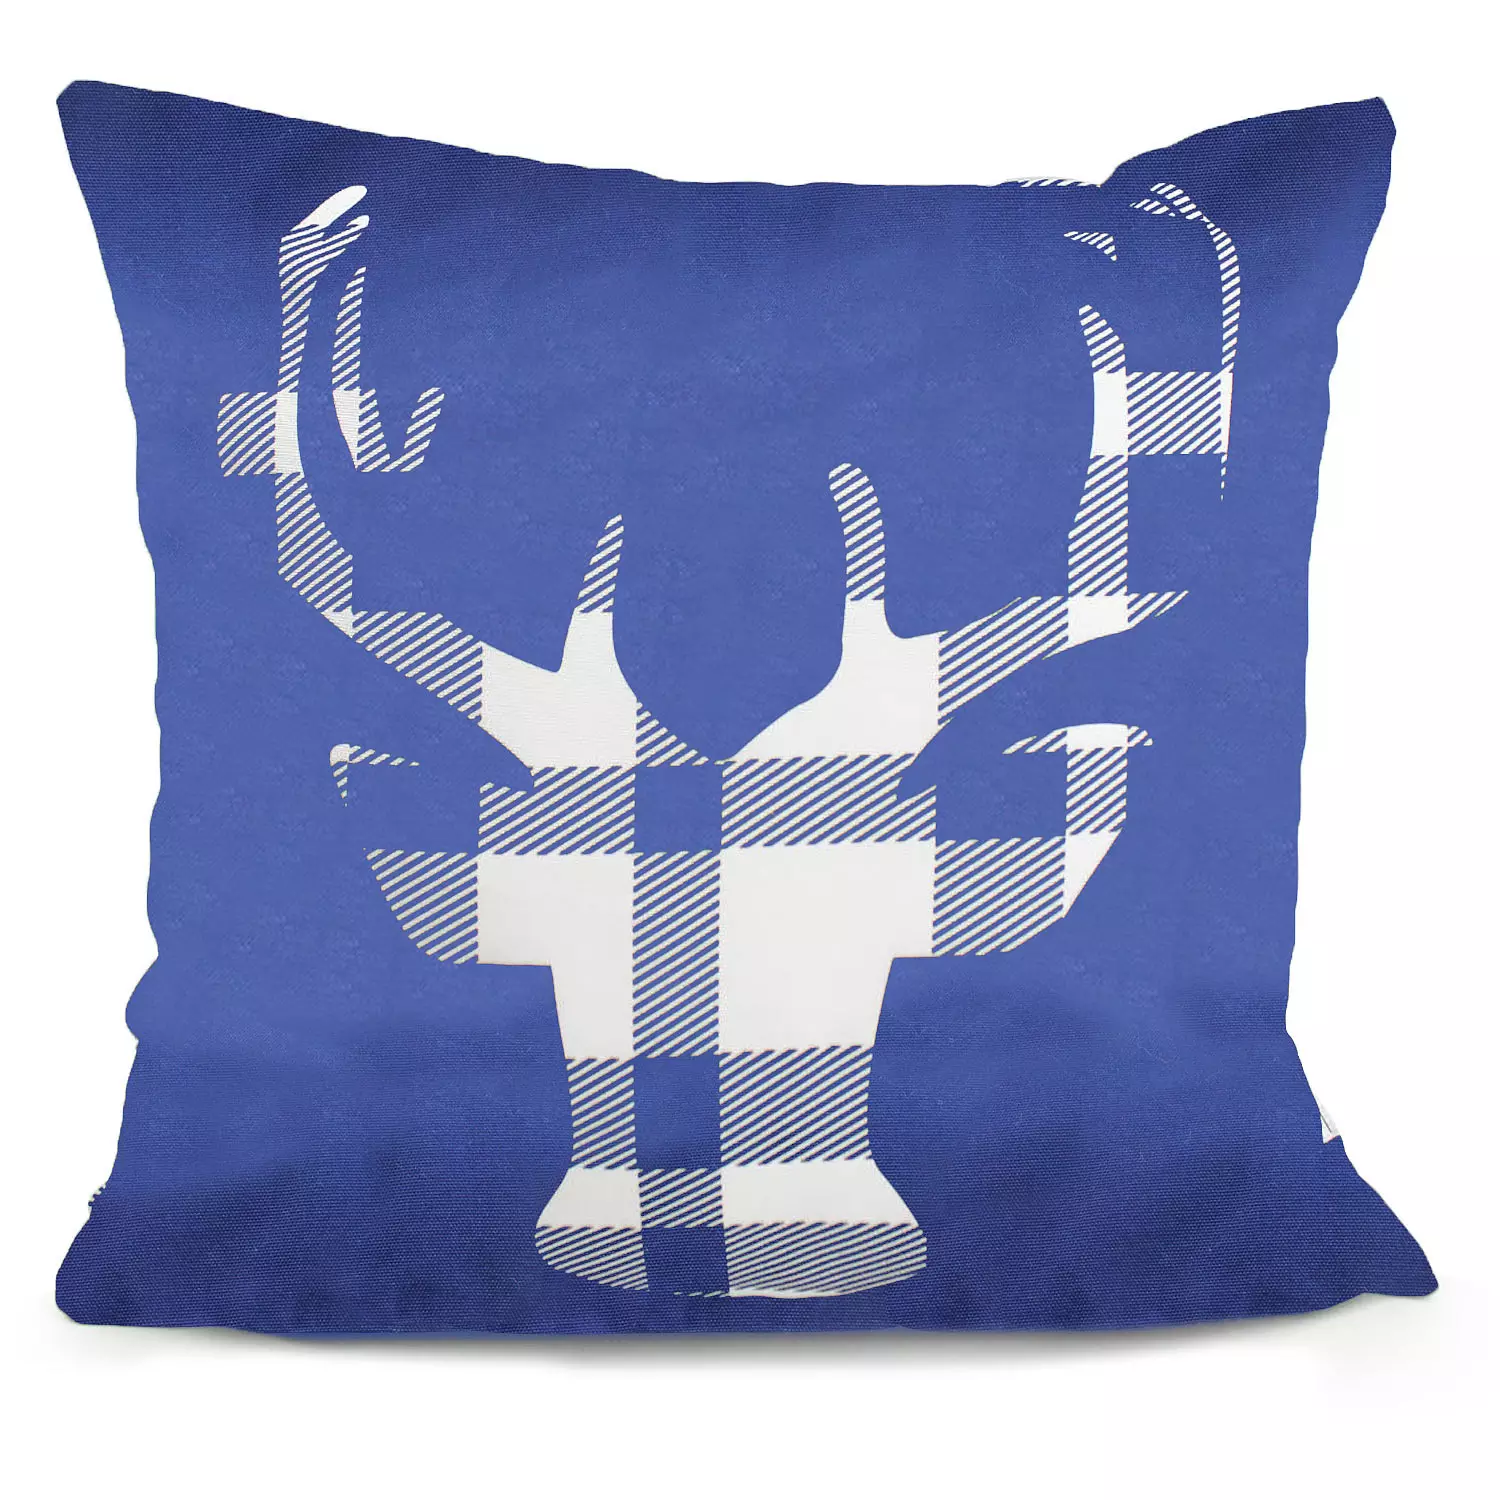 Printed decorative cushion with moose silhouette front and matching plaid back, 18"x18", blue